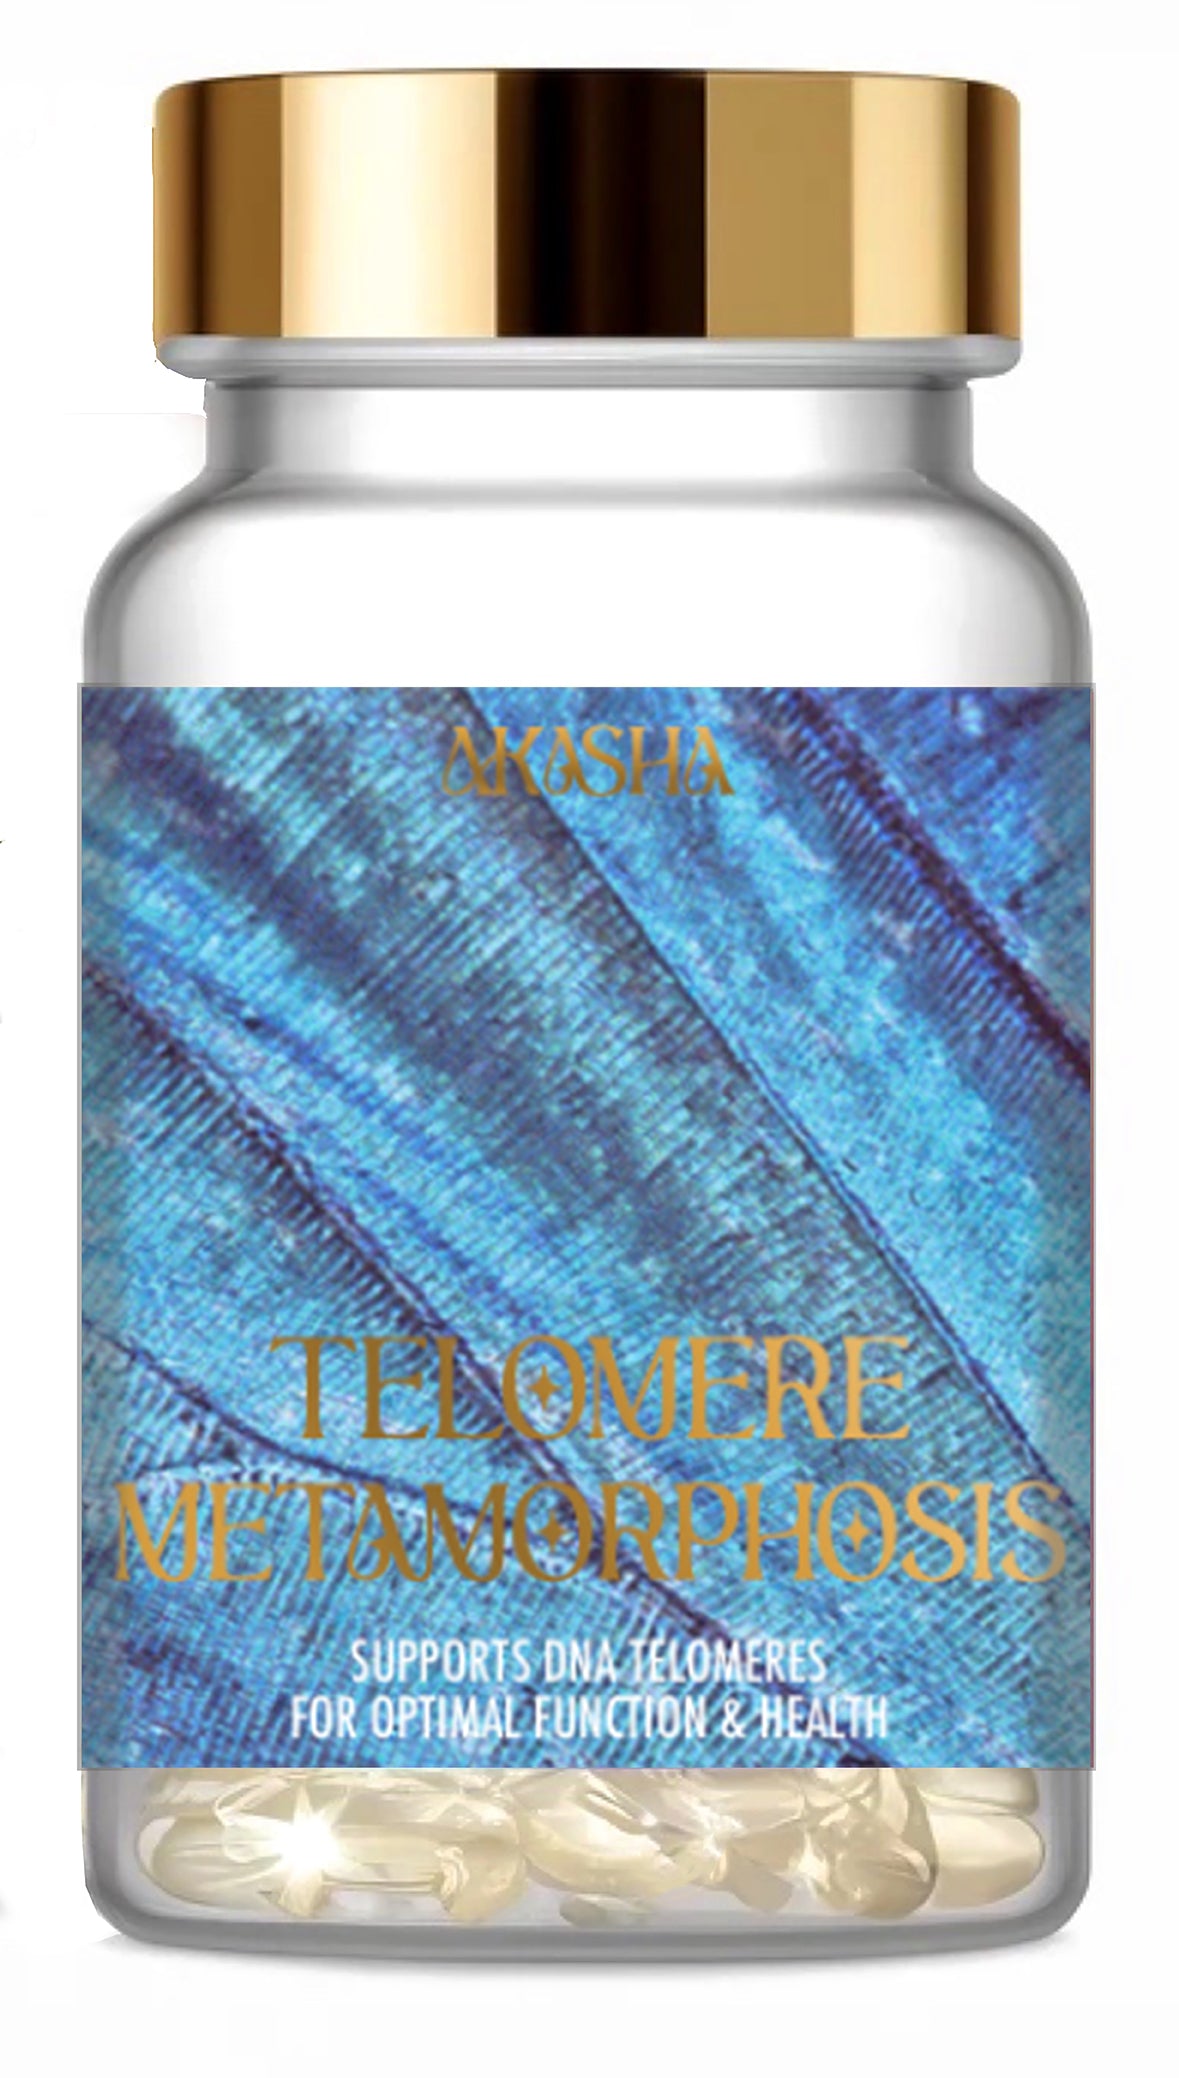 Vegan DNA Telomere Support Supplement with Astragalus, Resveratrol, and EGCG - Cellular Health and Longevity, LIFE EXTENSION SUPPLEMENT, NATURAL life extension, telomere lengthening, extend telomeres, repair telomeres naturally, telomere supplement, repair DNA, DNA UPGRADE SUPPLEMENT